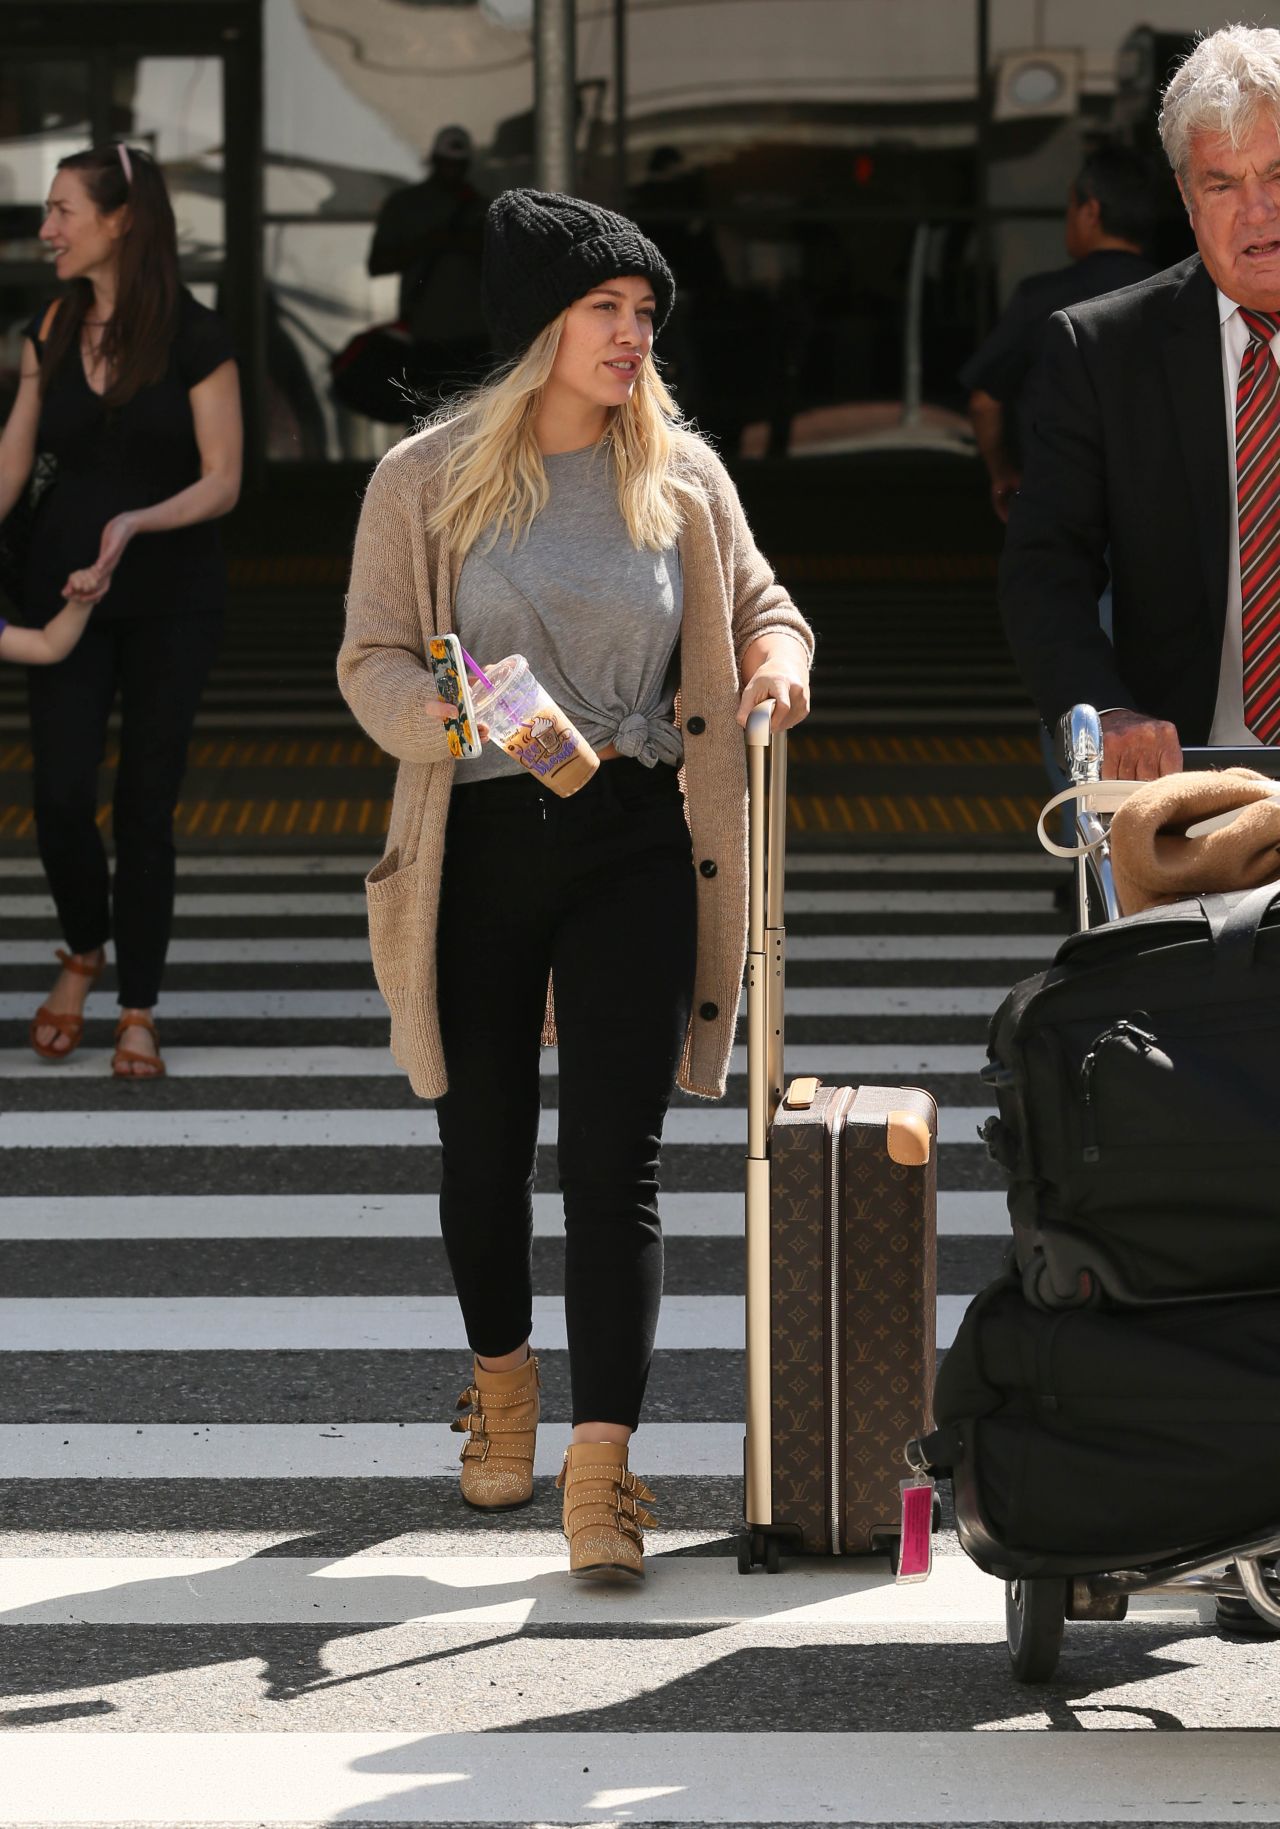 Hilary Duff arrives at the airport carrying Louis Vuitton luggage  Featuring: Hilary Duff Where: Los Angeles, California, United States When:  29 Sep 2016 Stock Photo - Alamy